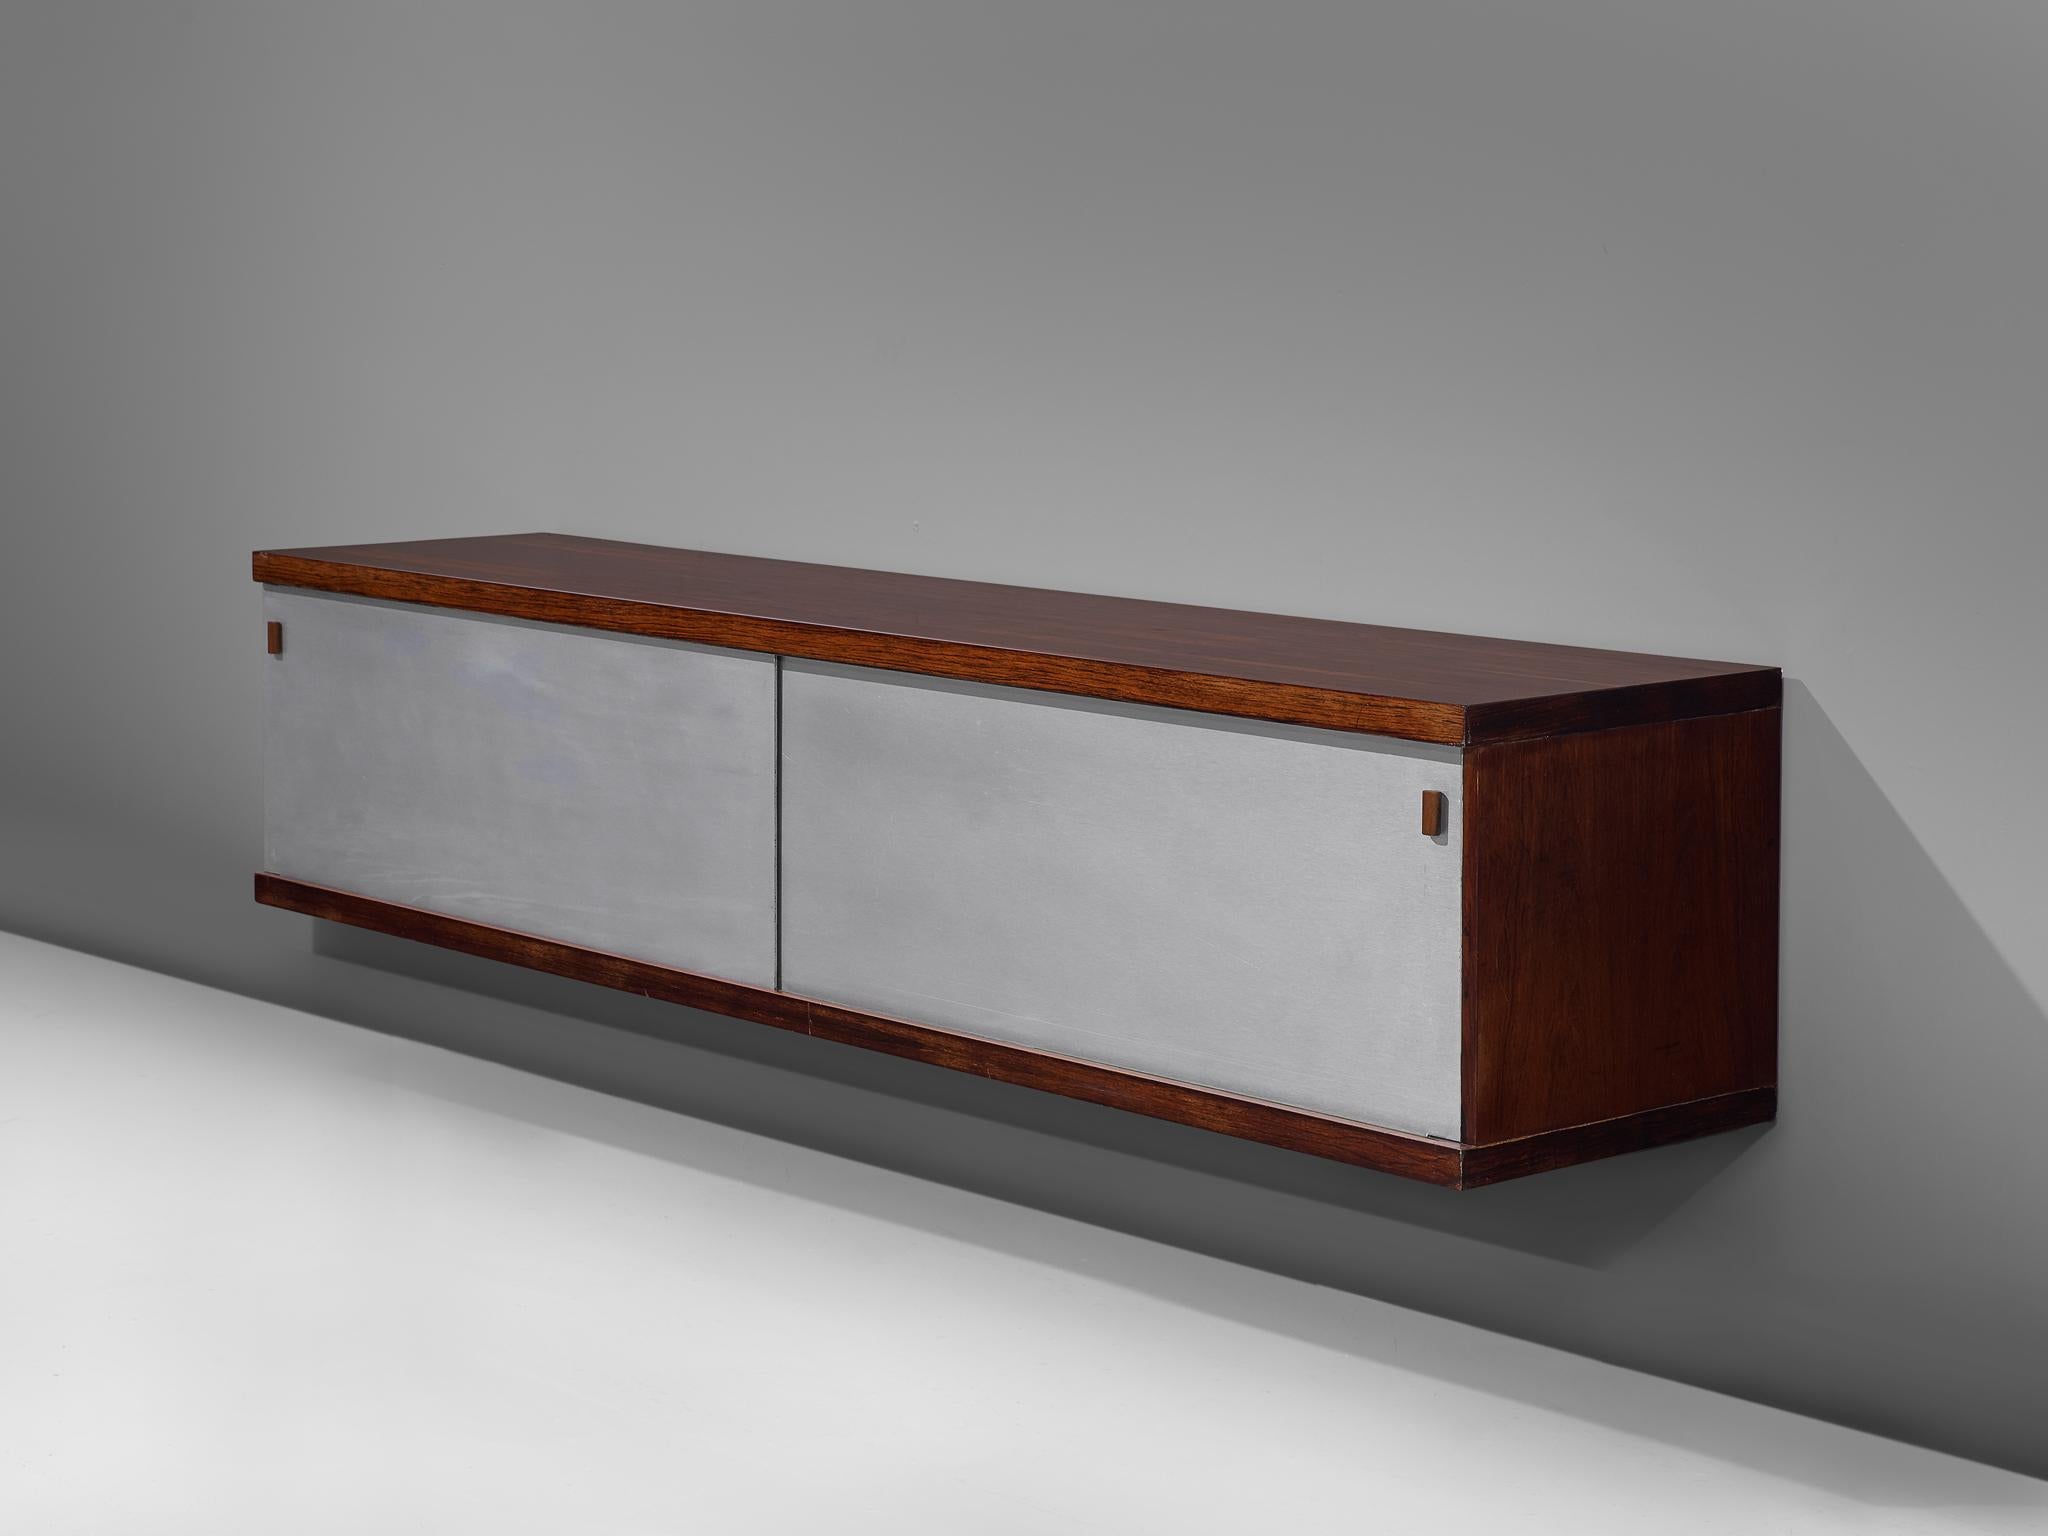 Horst Brüning for Behr, wall-mounted credenza, rosewood, aluminum and wood, Germany, 1960.

This geometric credenza holds a rosewood case and a brushed metal frame. The sliding doors are made of grey Formica and have geometric grips. The rosewood